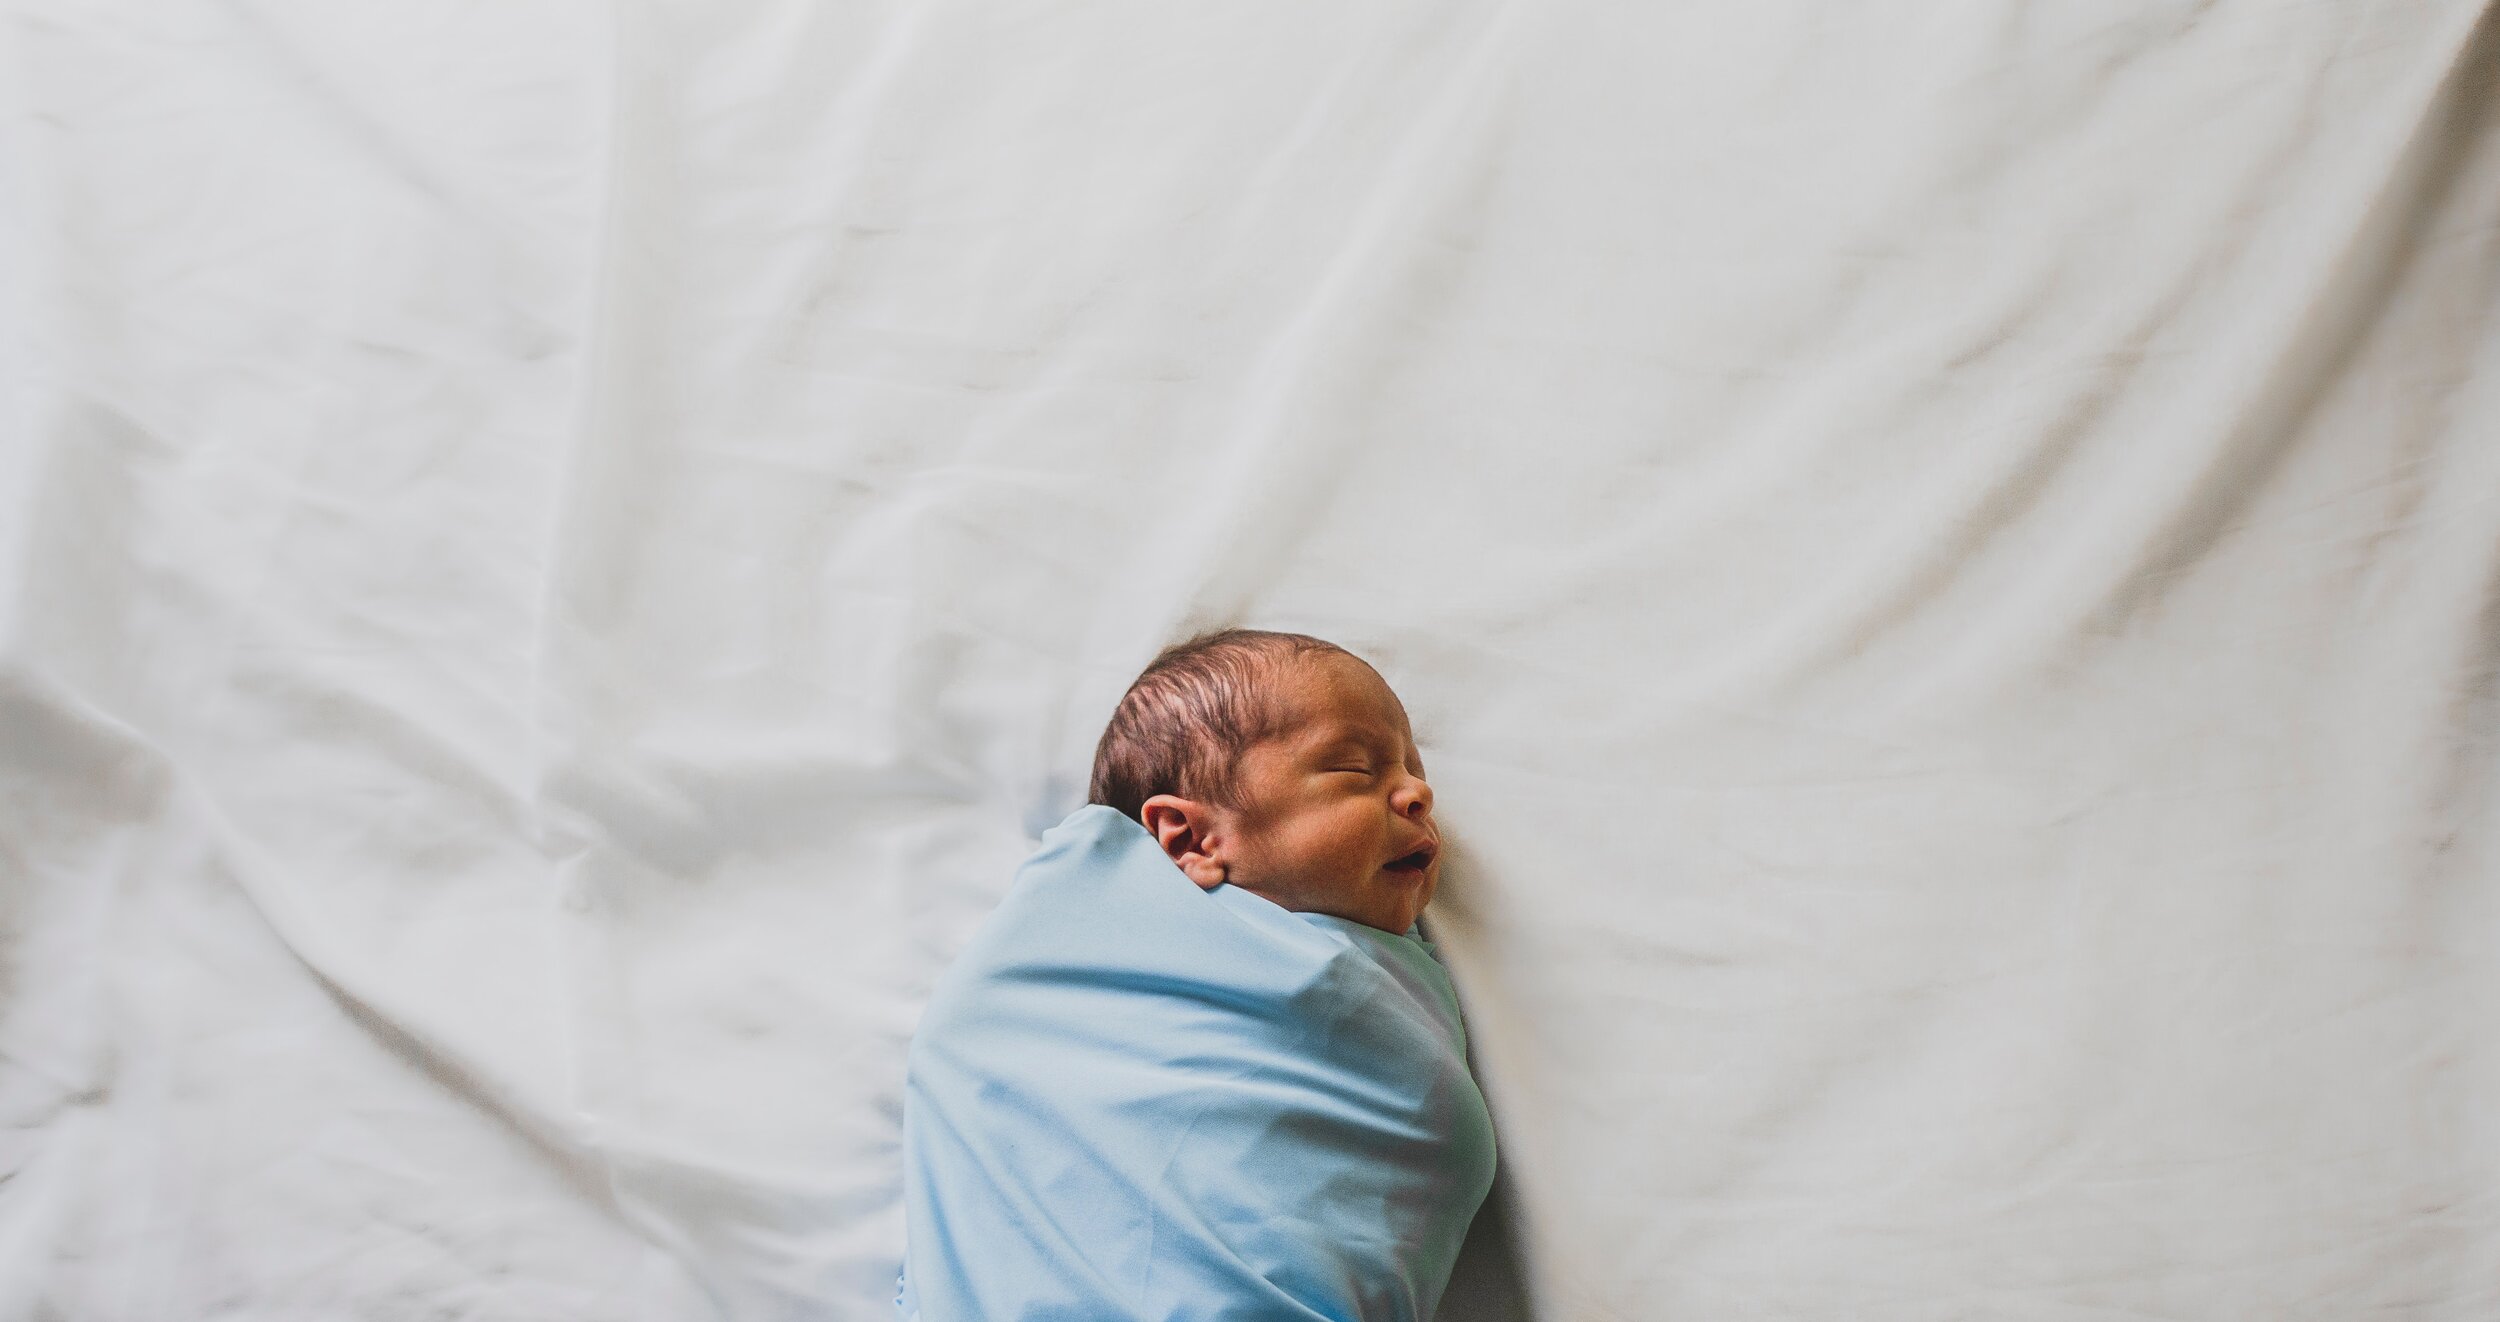 photo-of-new-born-baby-covered-with-blue-blanket-3617843.jpg